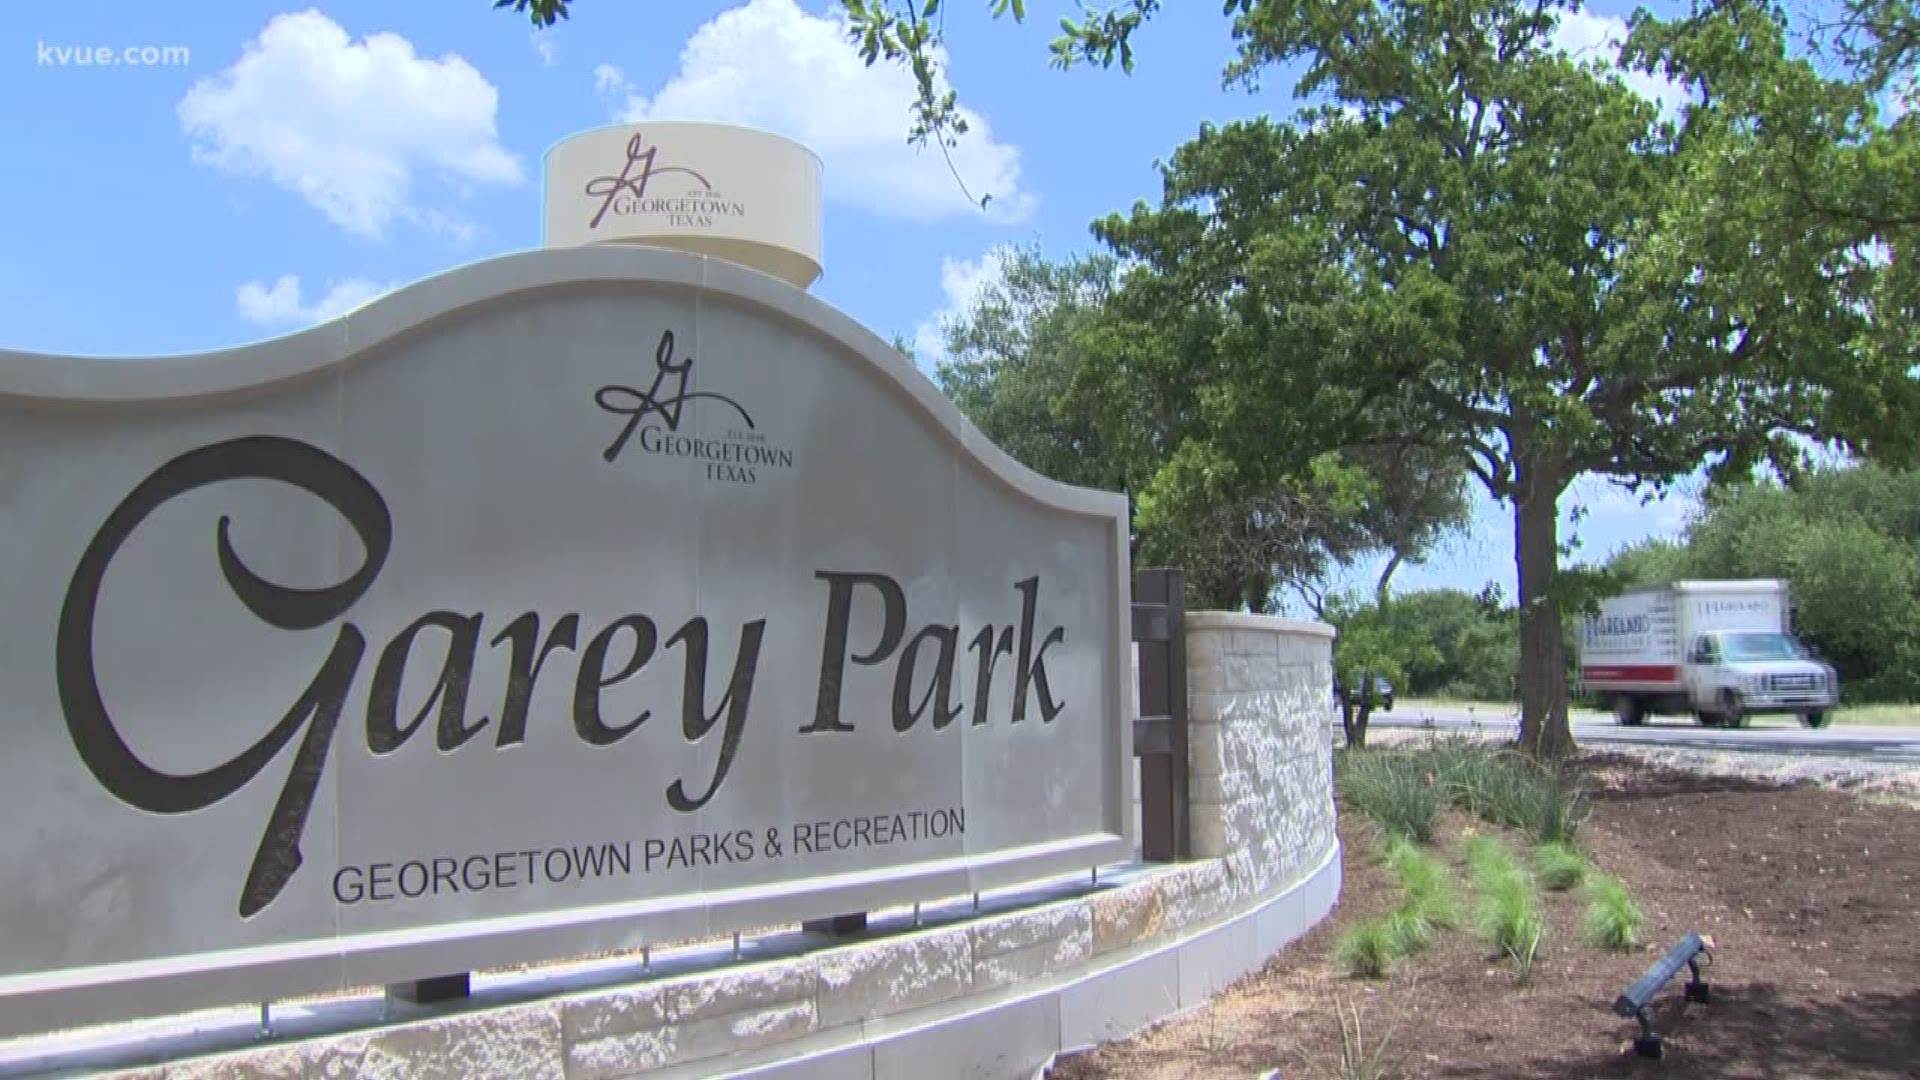 Garey Park will have a playground, three zip lines, a splash pad, a dog park, an equestrian area and 4.7 miles of hiking trails.